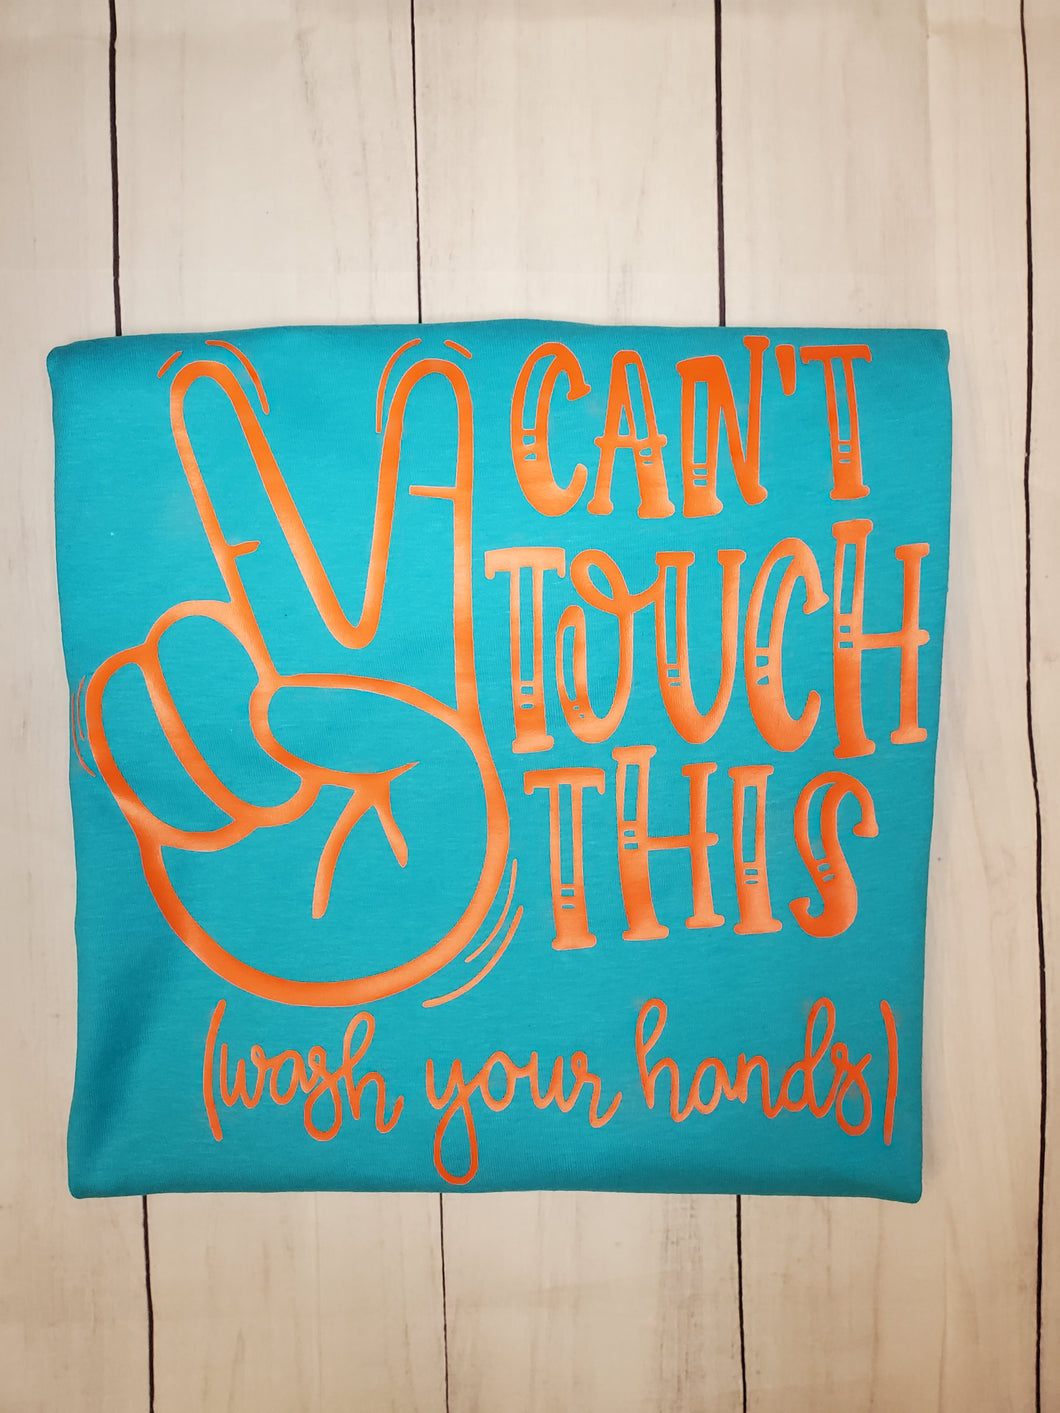 Can't touch this (wash your hands) shirt